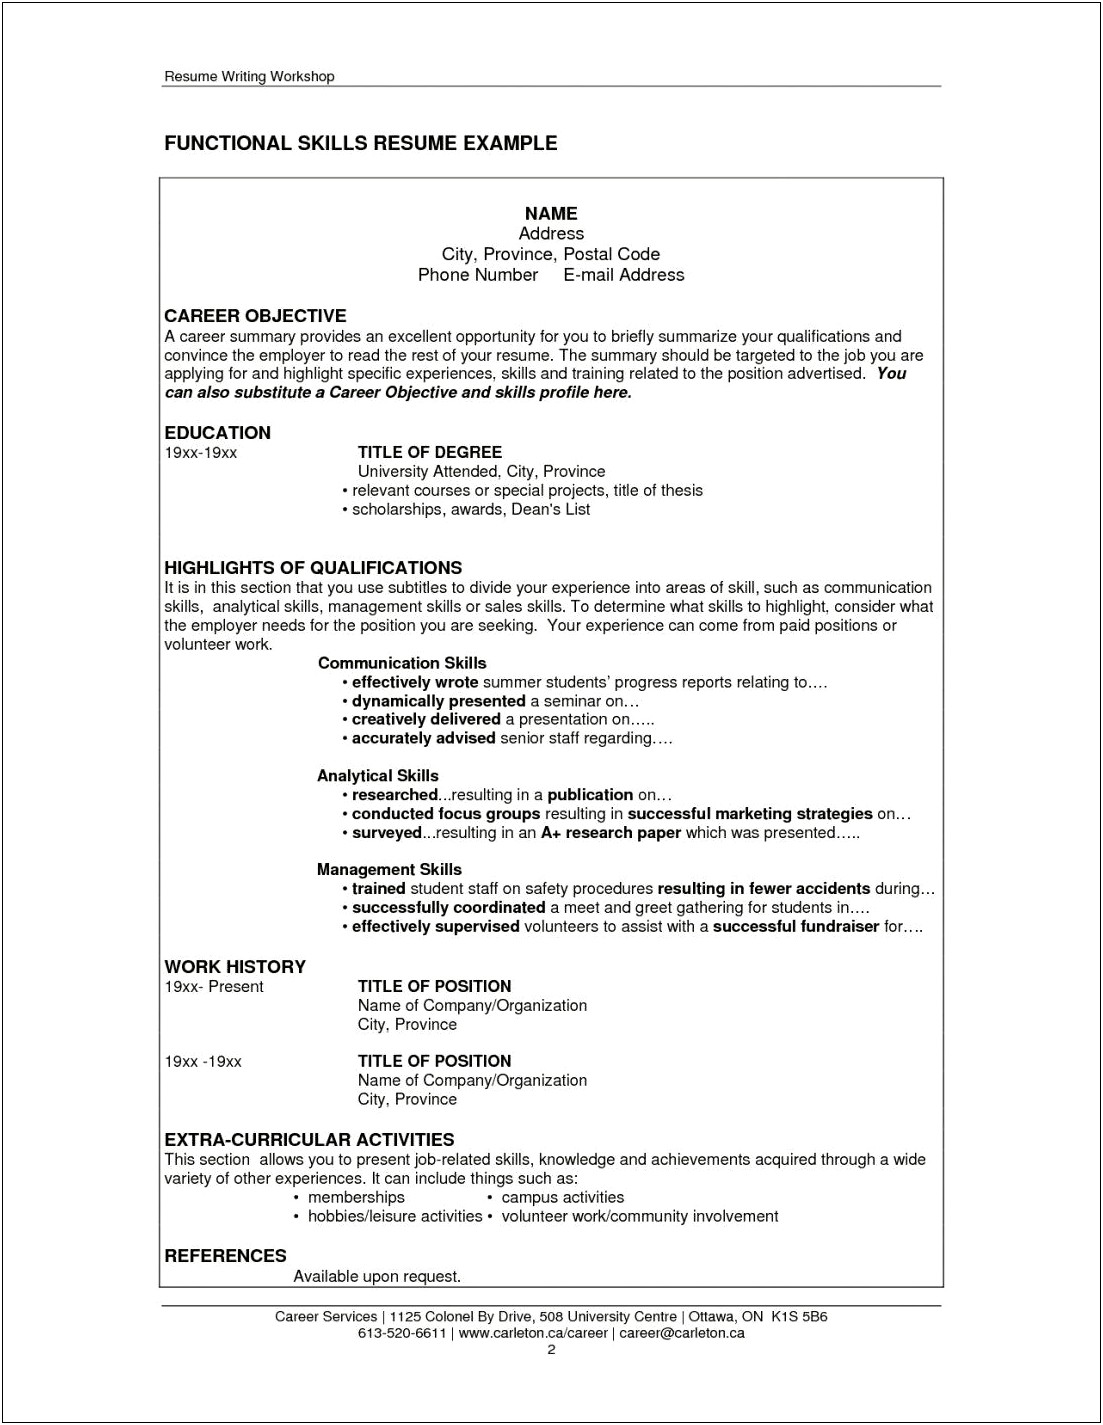 Skills And Qualifications Resume Sample